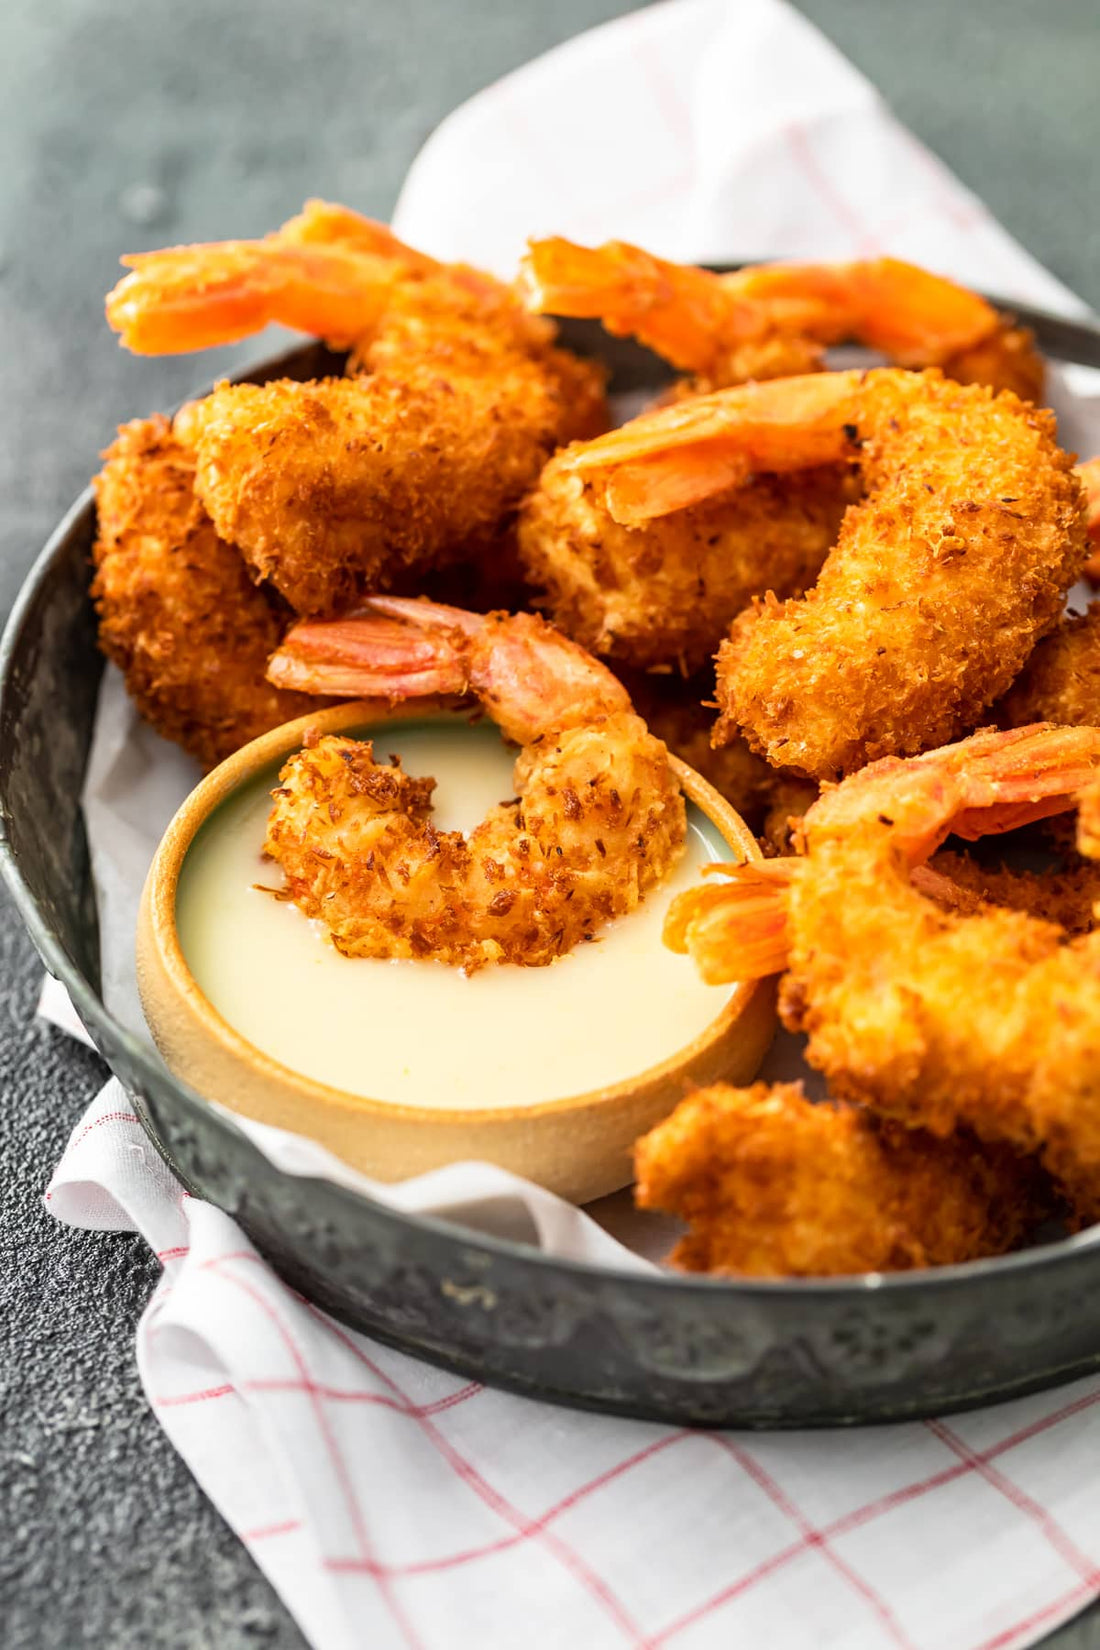 Coconut-Pineapple Colada Shrimp with Pineapple Chipotle Dipping Sauce